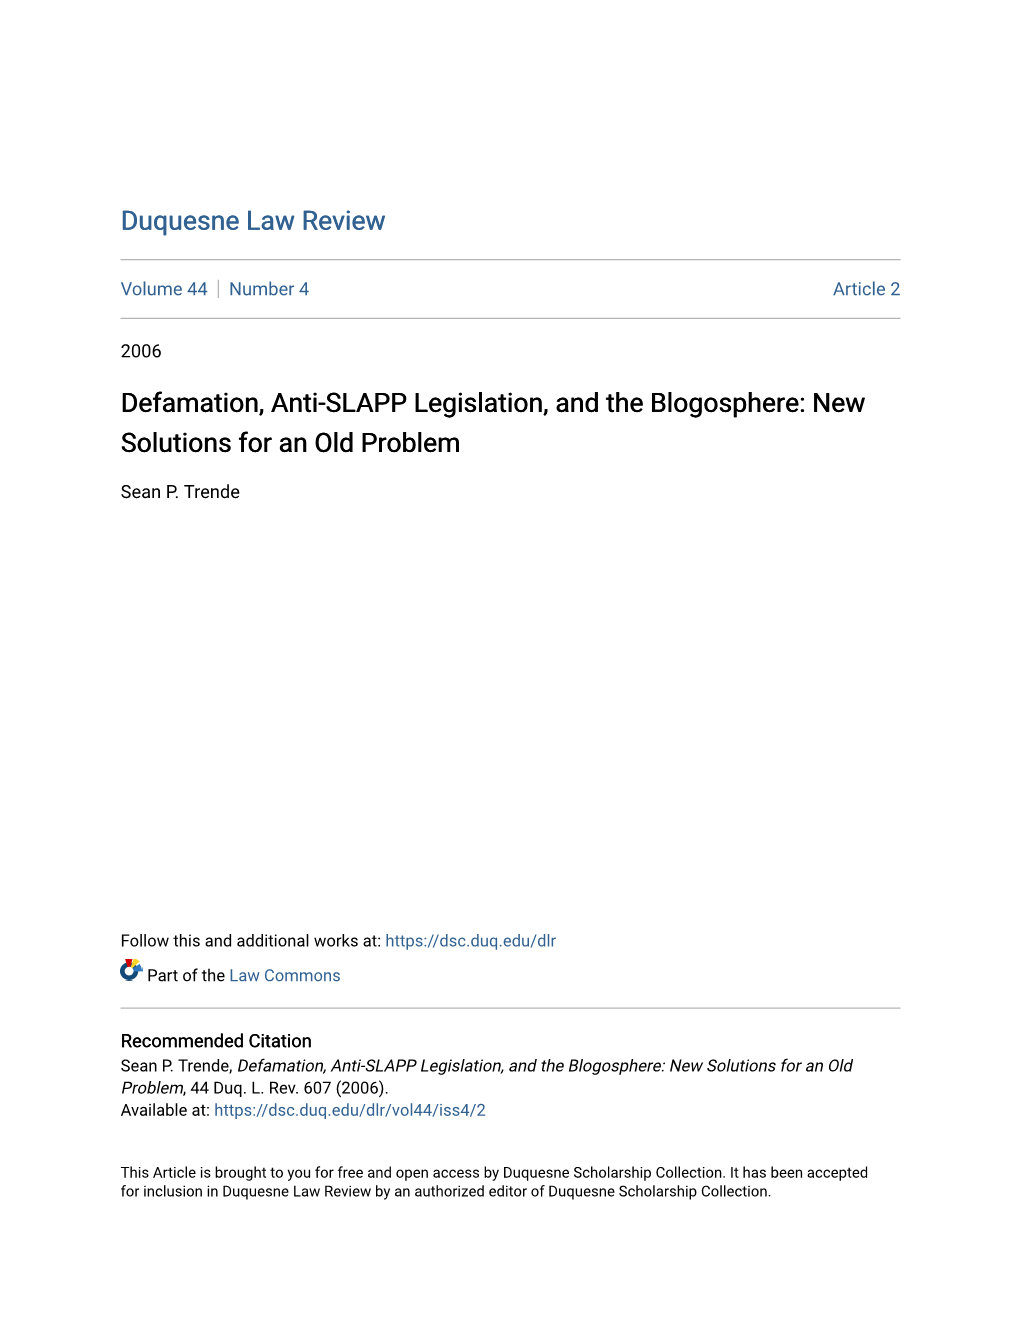 Defamation, Anti-SLAPP Legislation, and the Blogosphere: New Solutions for an Old Problem